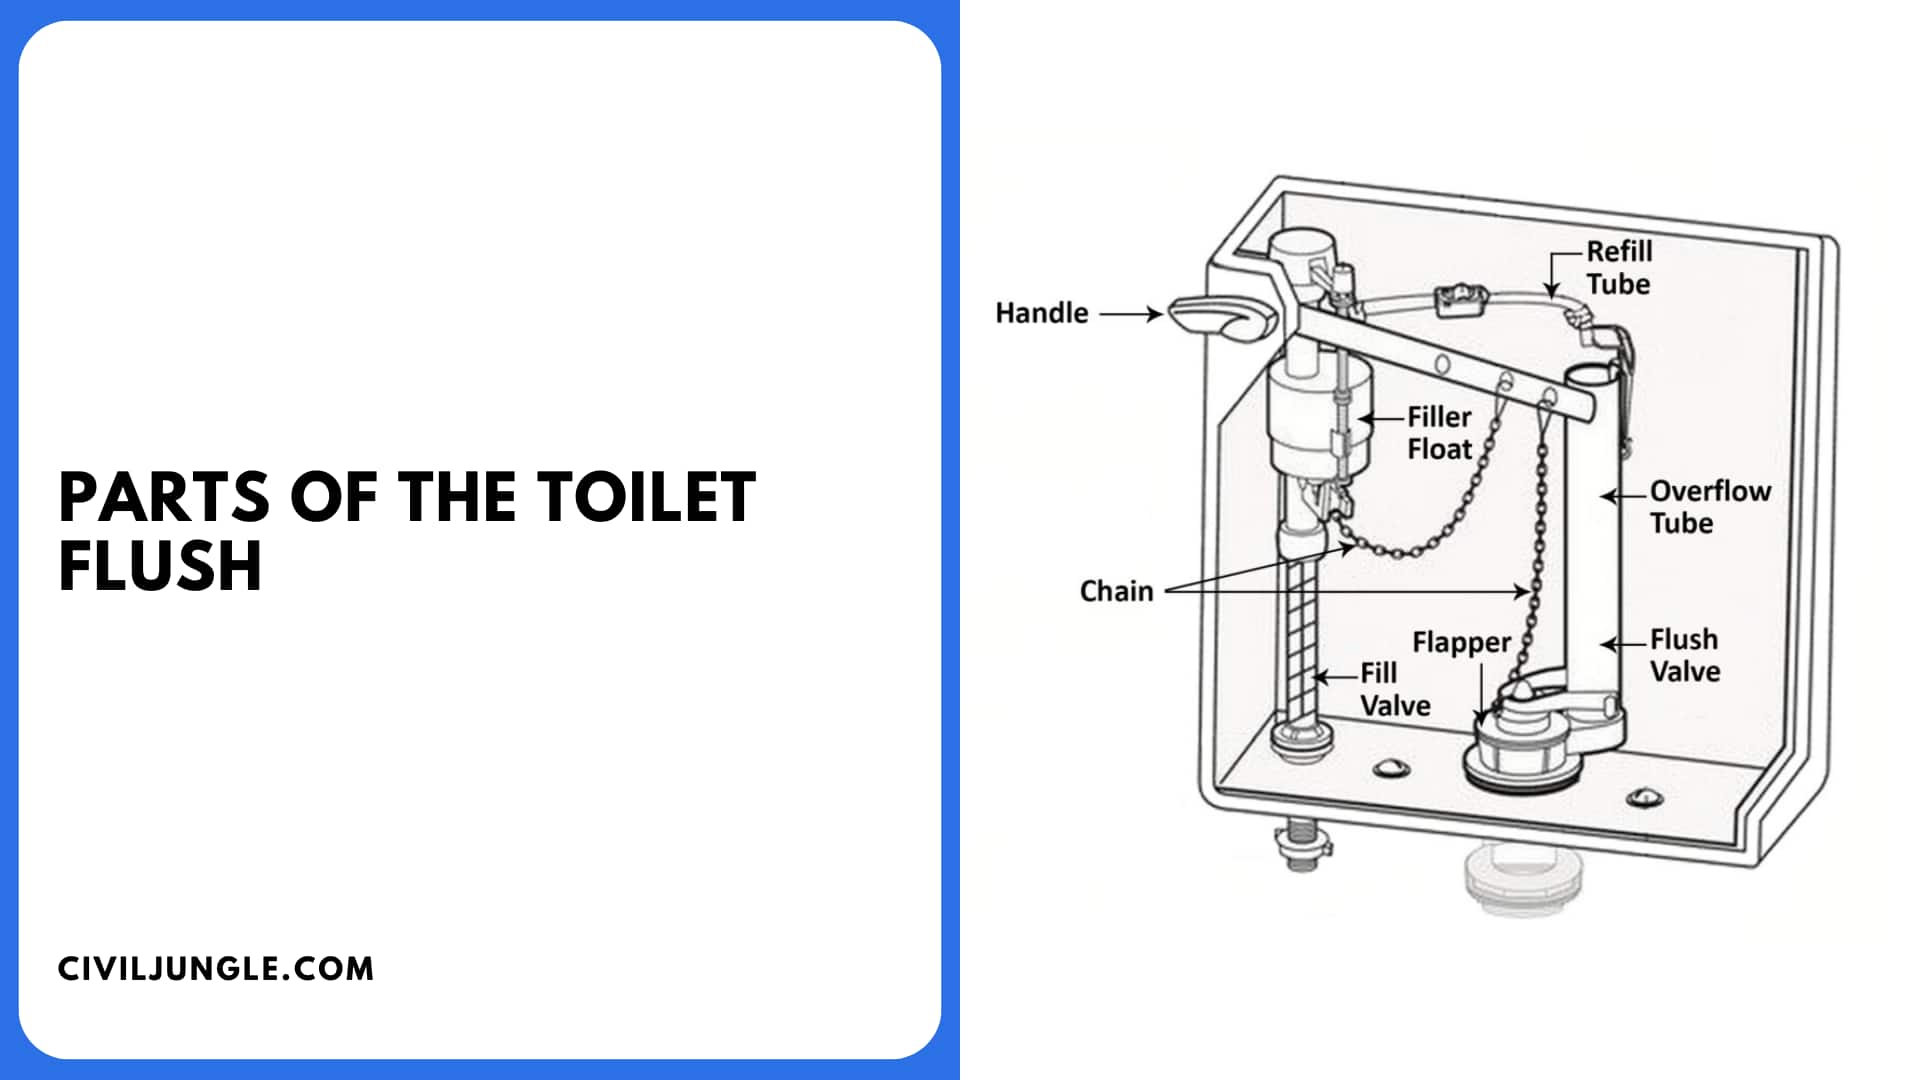 Parts of the Toilet Flush